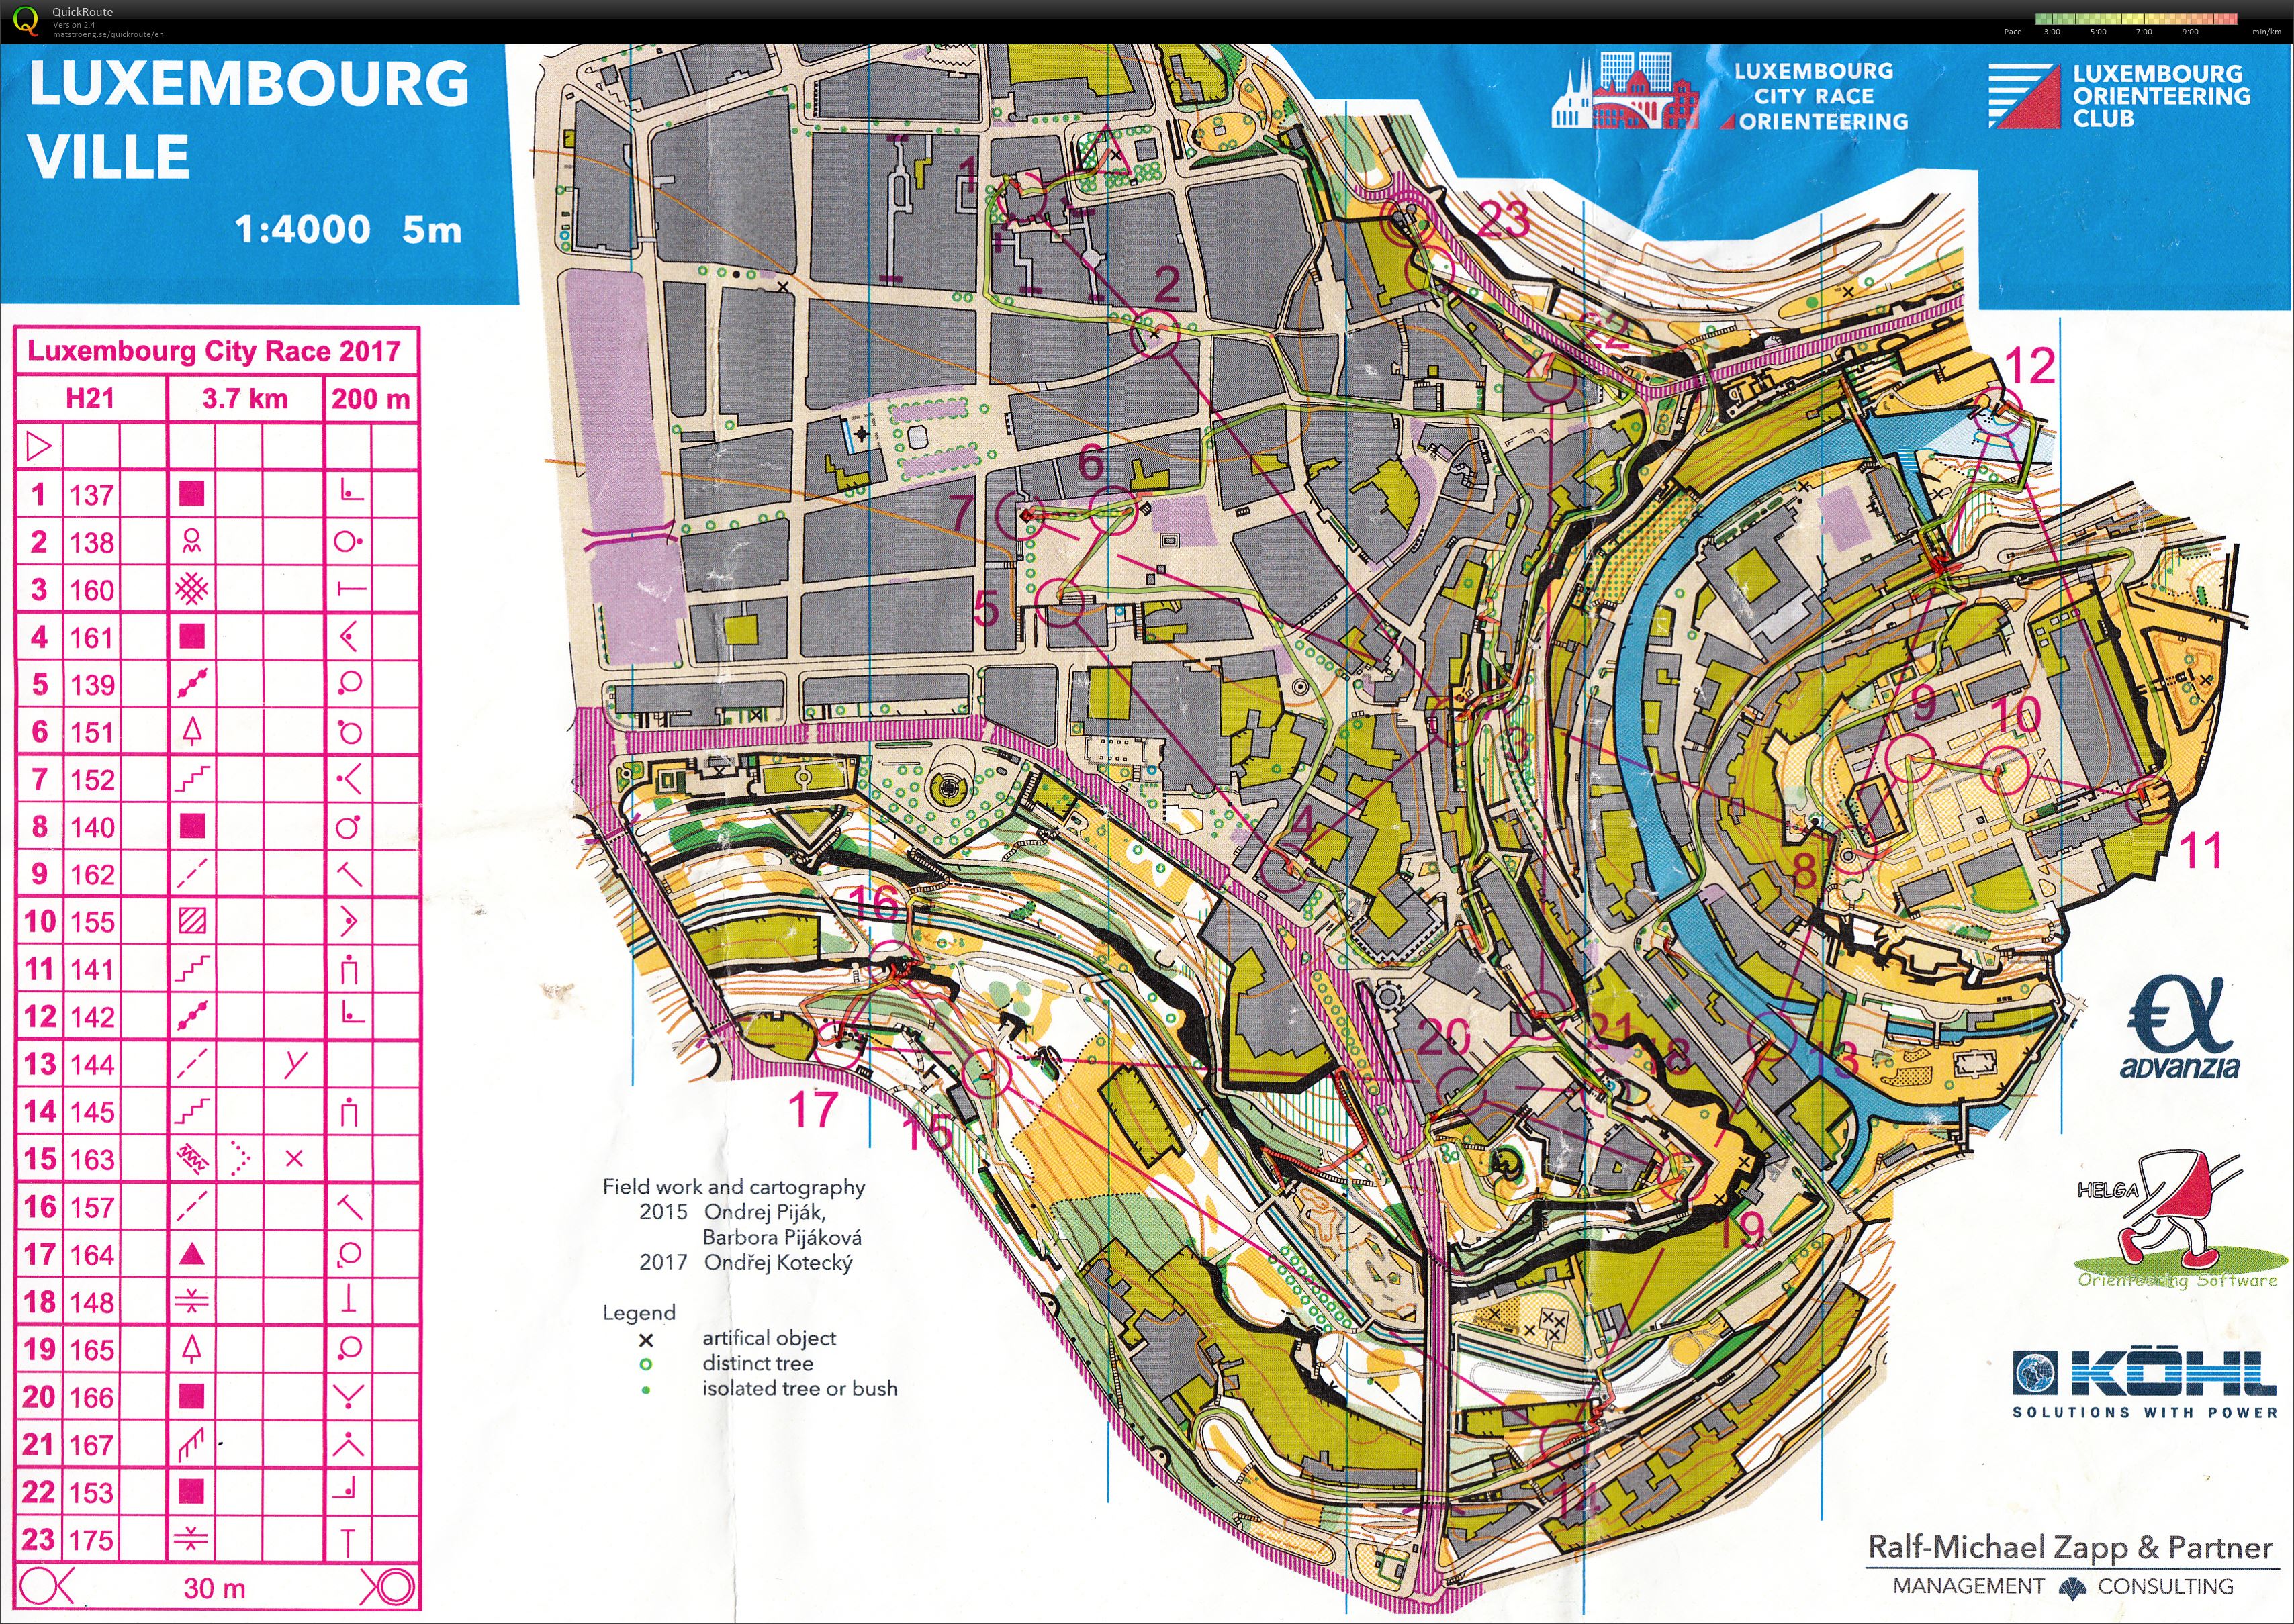 Luxembourg City Race (05-11-2017)